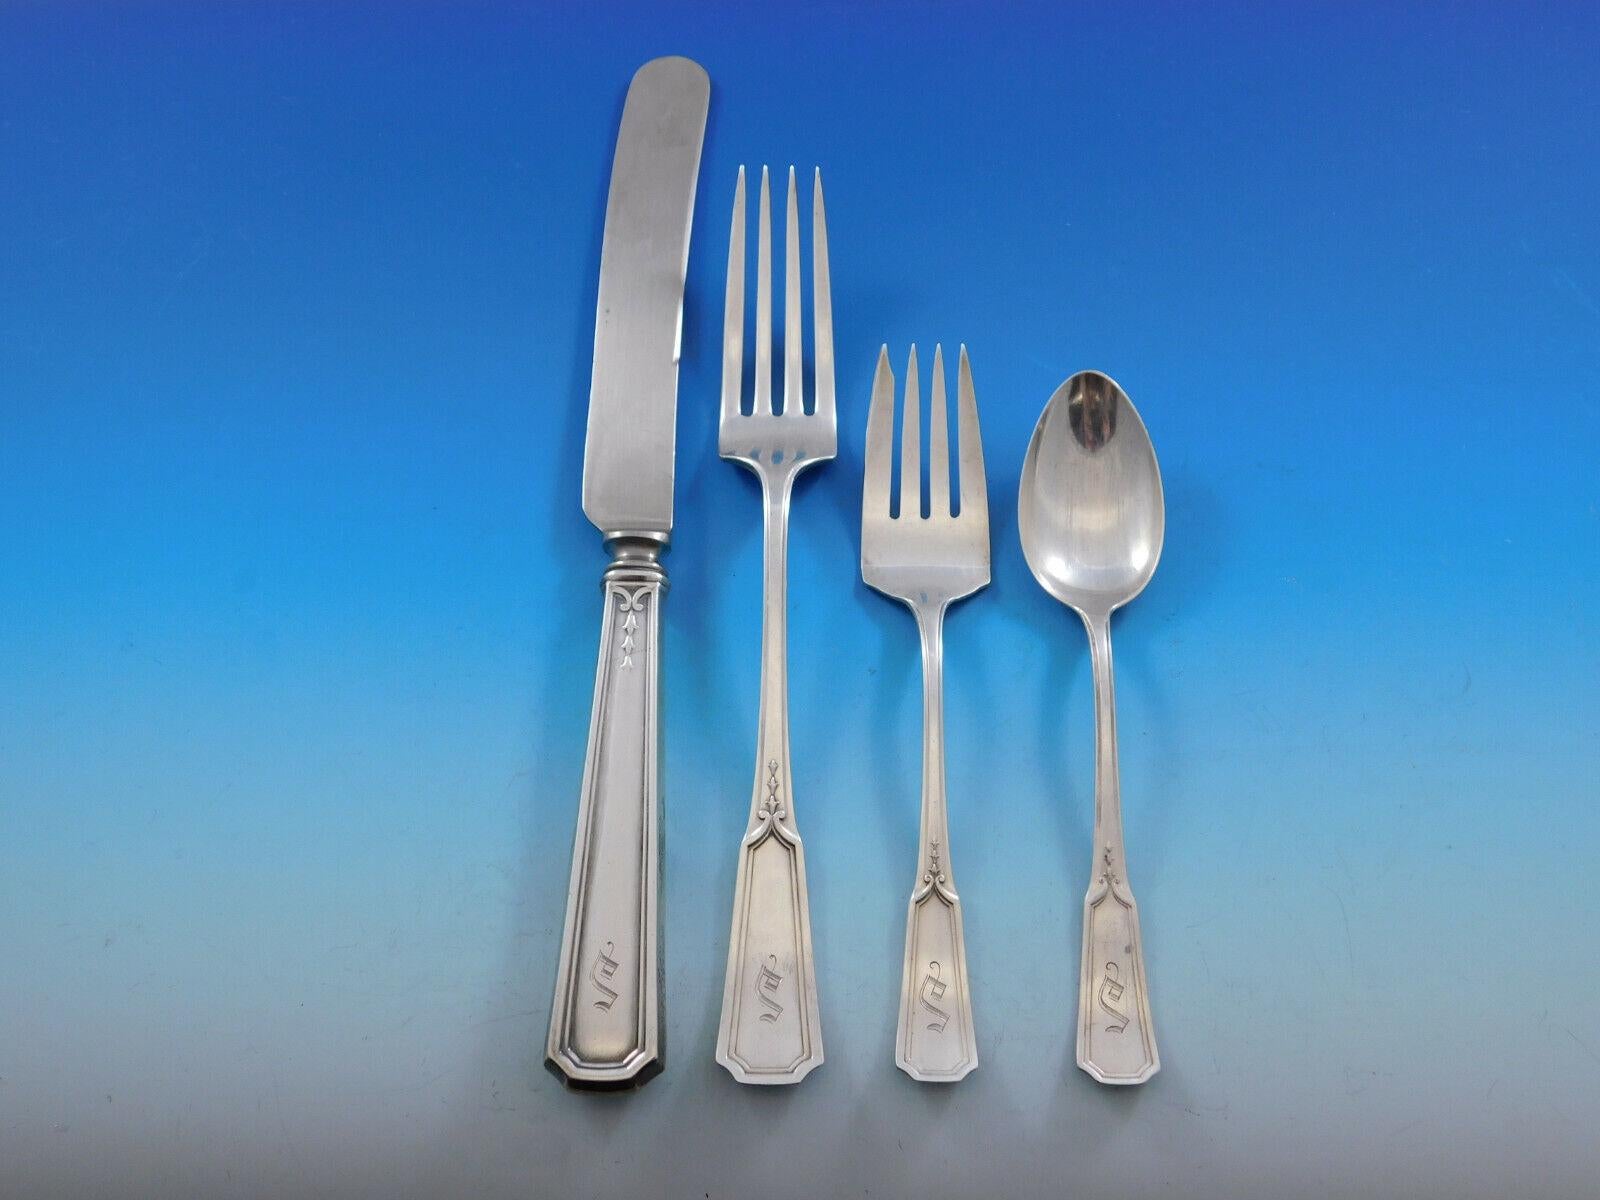 Rare dinner and luncheon size Florence Nightingale by Alvin circa 1919 sterling silver Flatware set, 68 pieces. This set includes:

8 Dinner Size Knives, 9 3/4